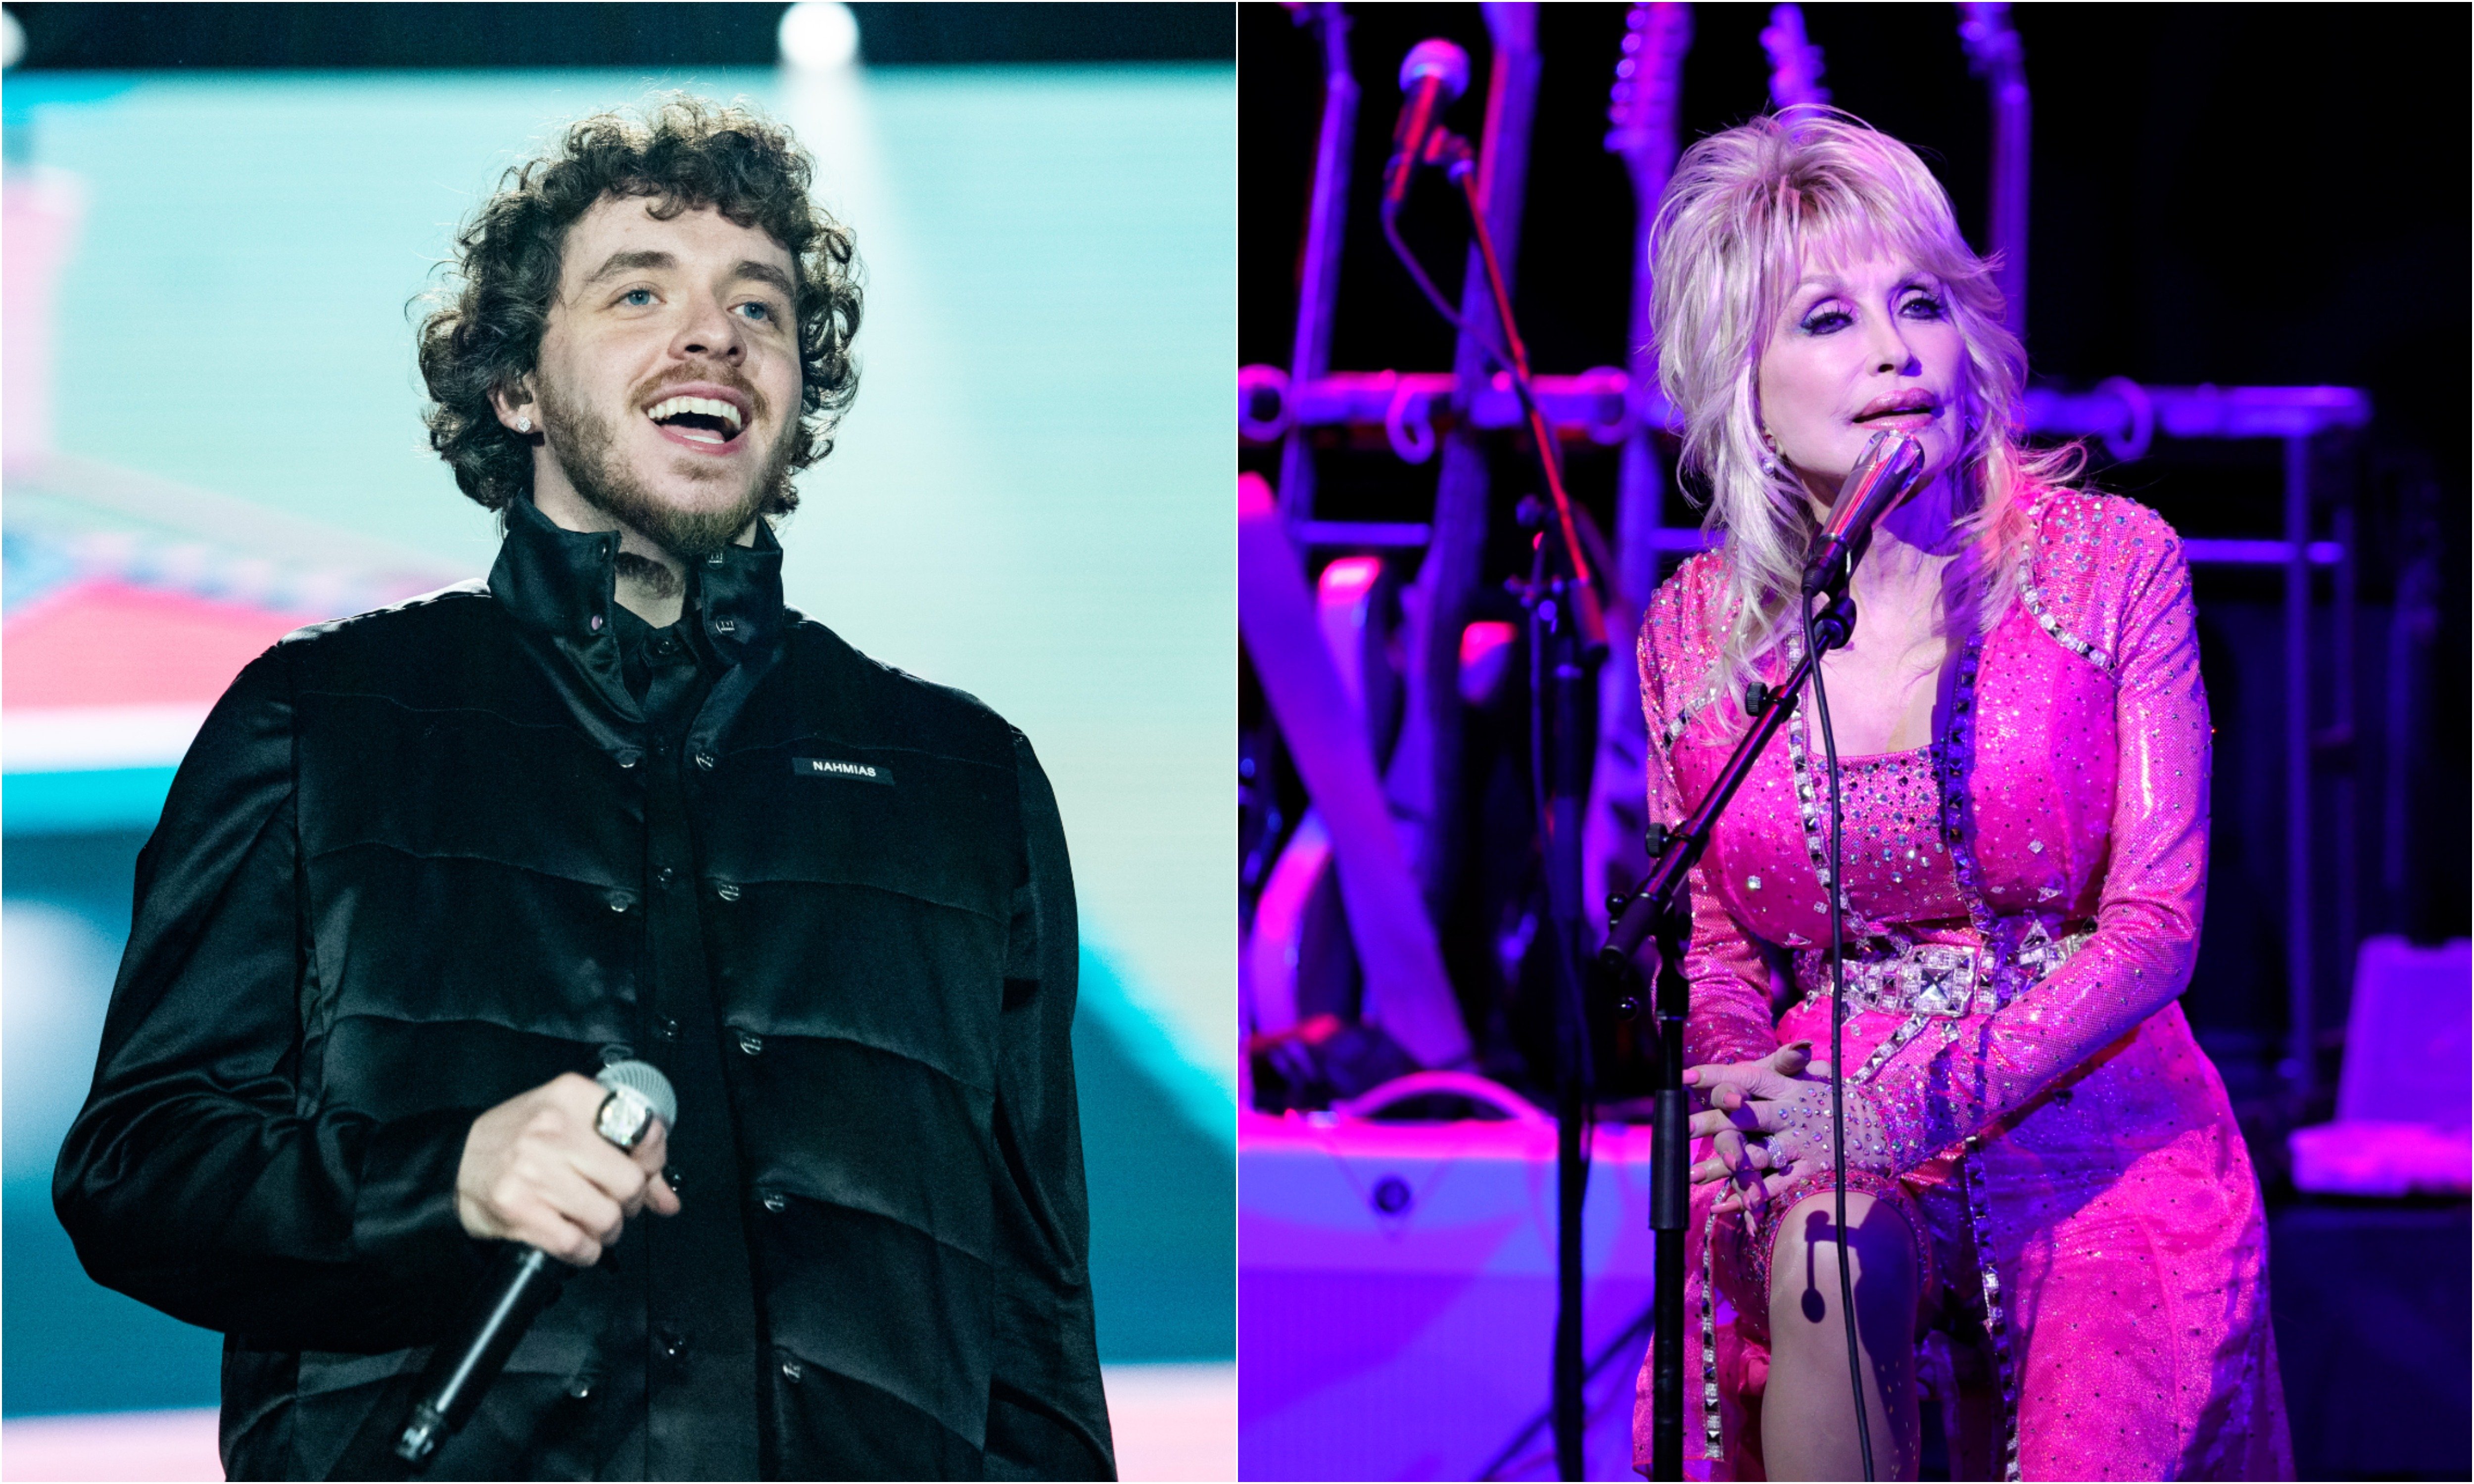 A joined photo of Jack Harlow and Dolly Parton